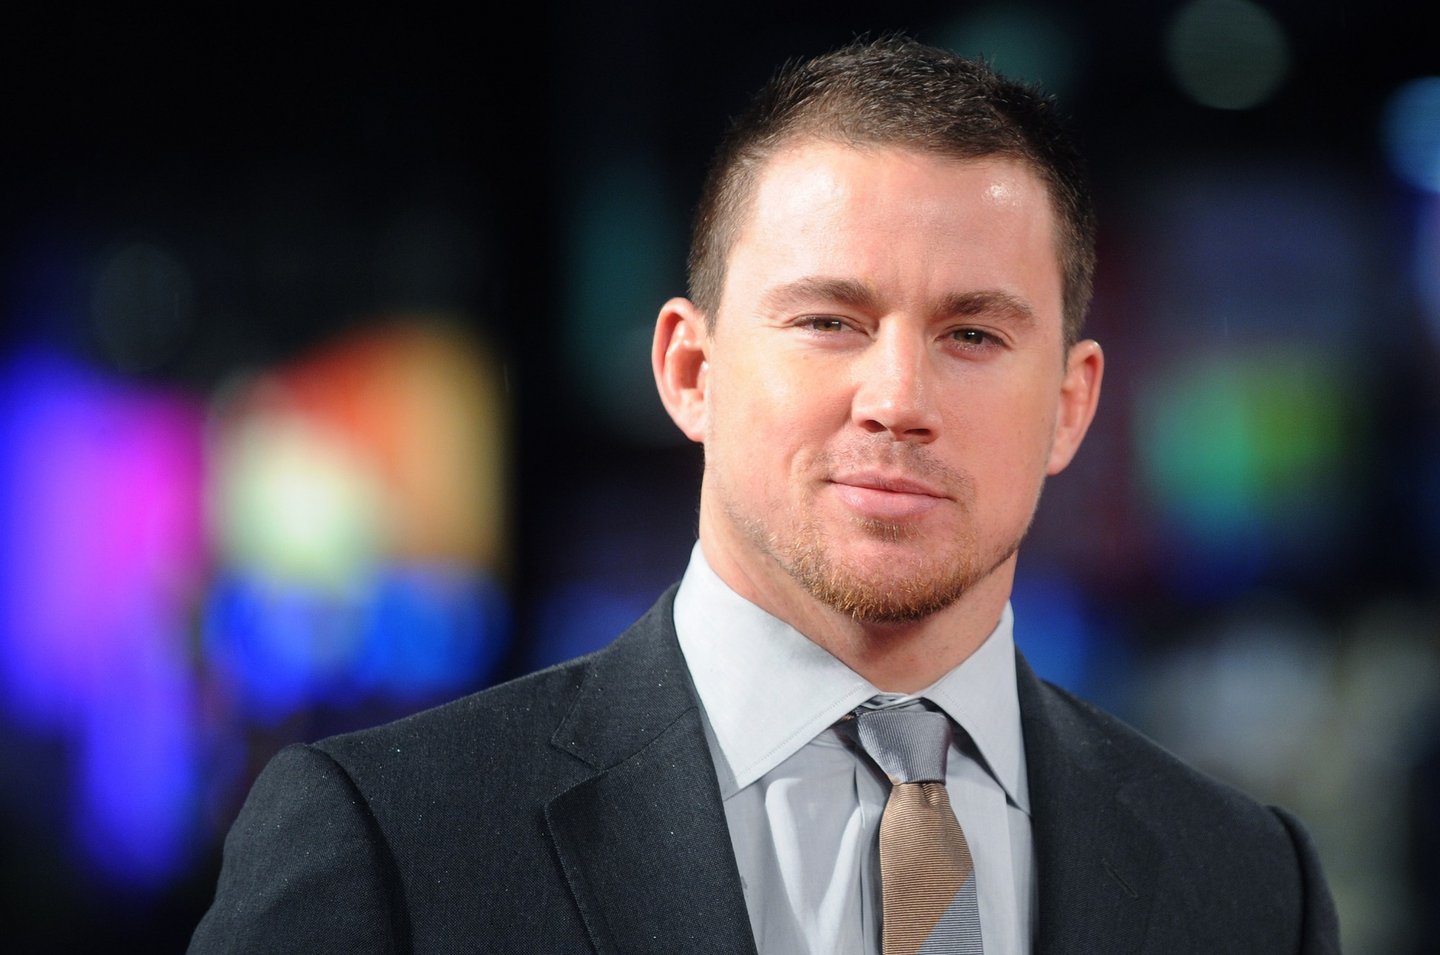 LONDON, UNITED KINGDOM - MARCH 18: Channing Tatum attends the UK Premiere of G.I. Joe: Retaliation at Empire Leicester Square on March 18, 2013 in London, England. (Photo by Stuart Wilson/Getty Images)